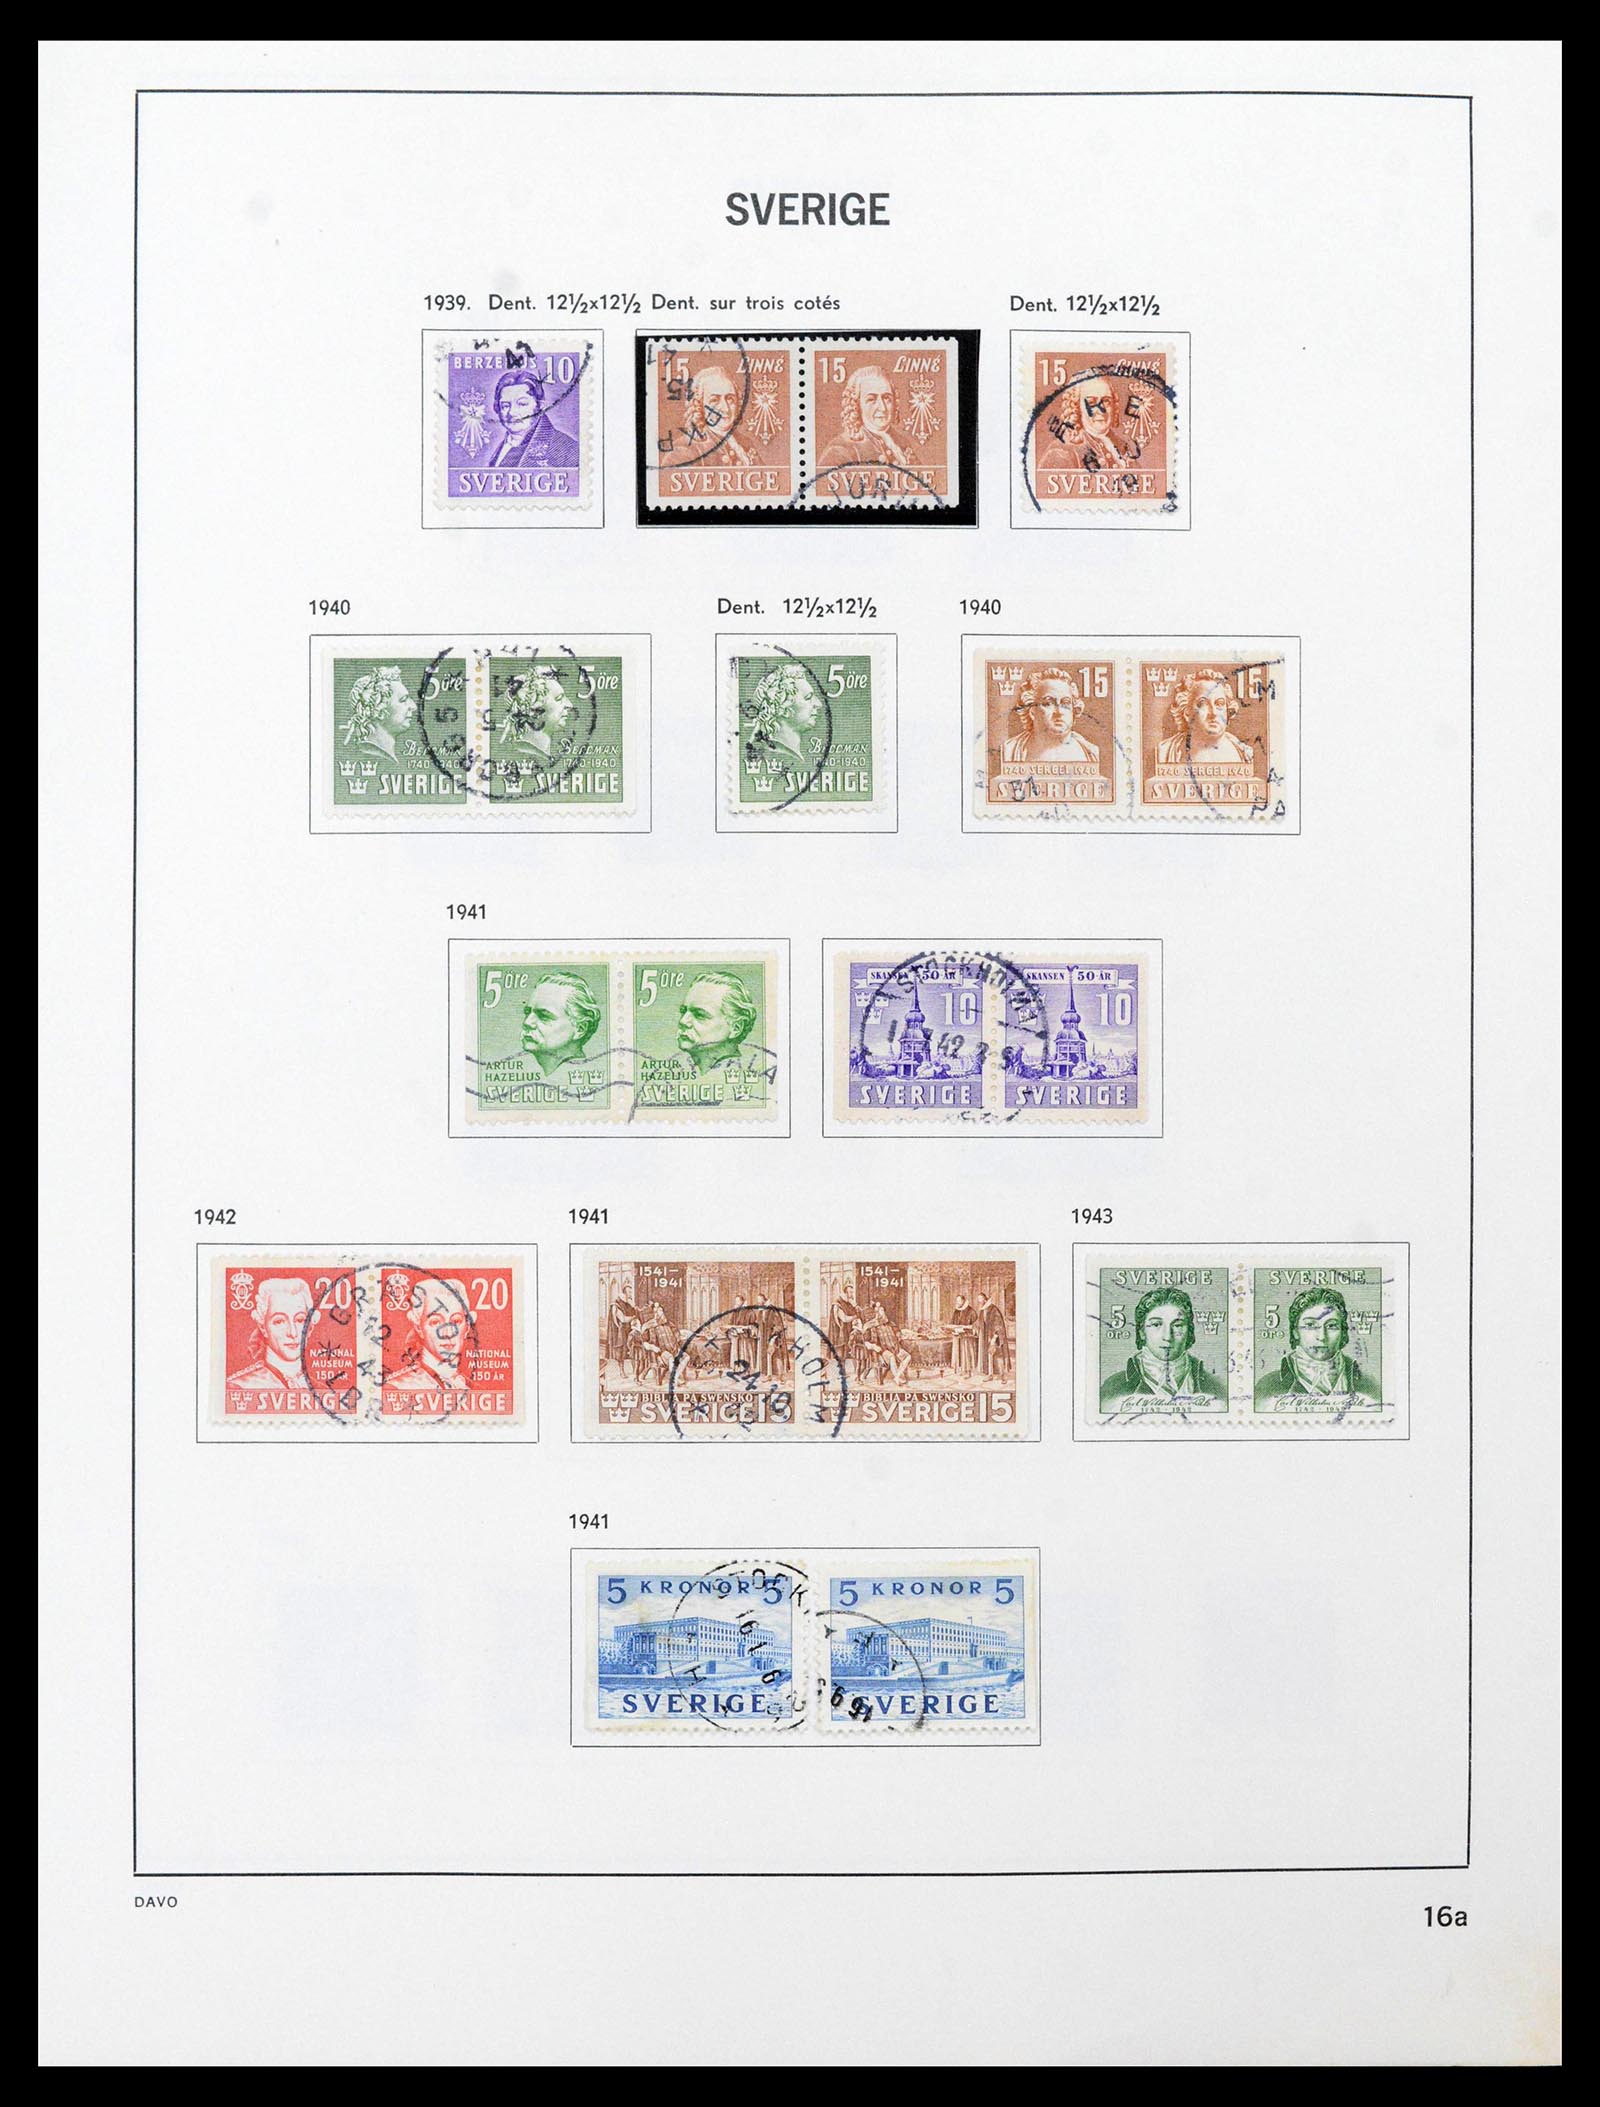 39331 0020 - Stamp collection 39331 Sweden 1855-2005.